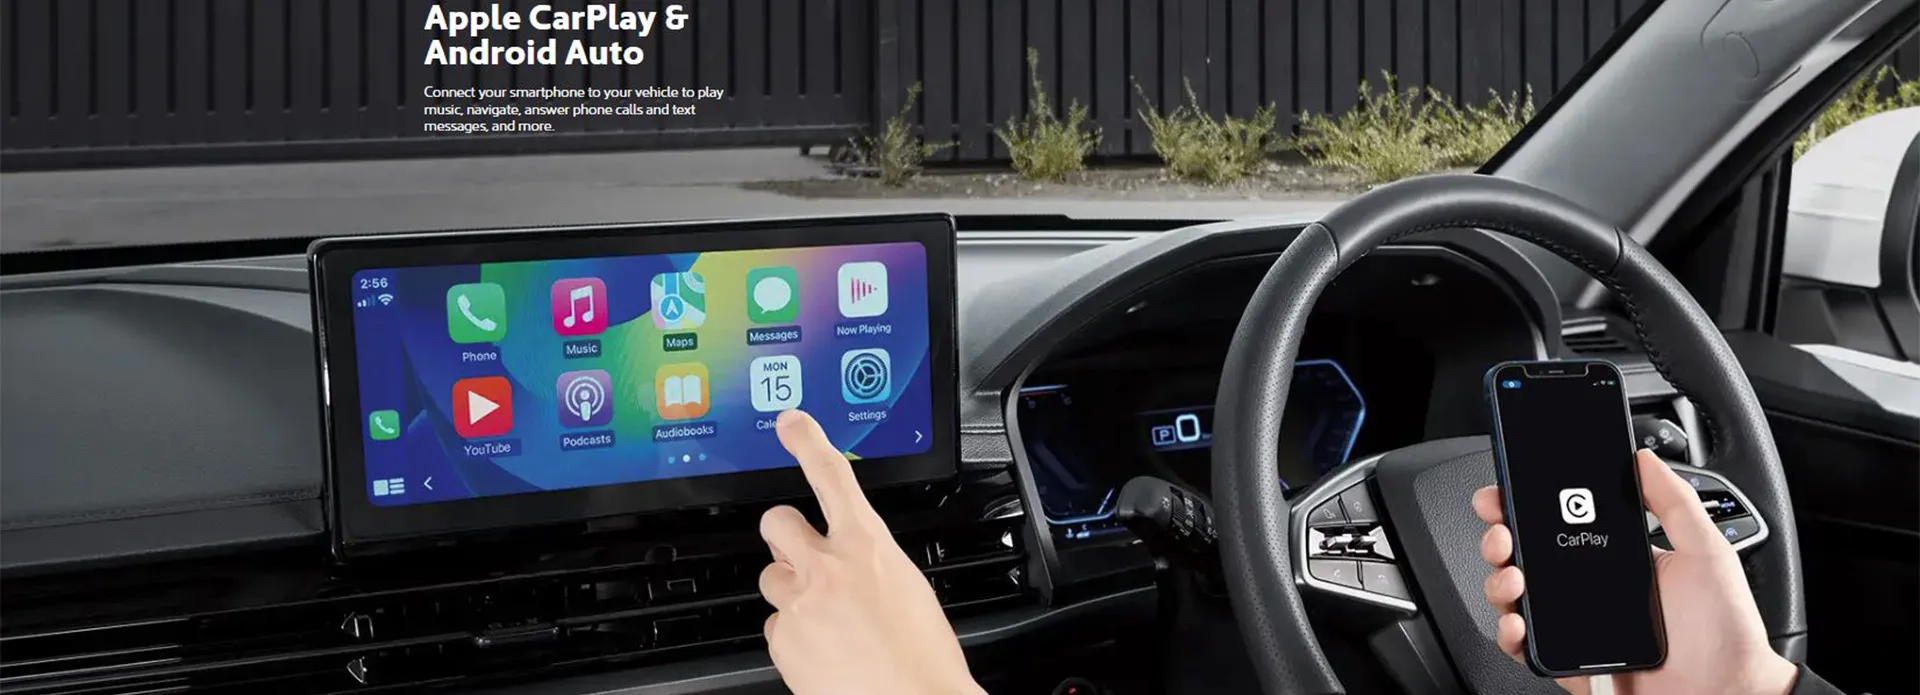 apple carplay and android auto